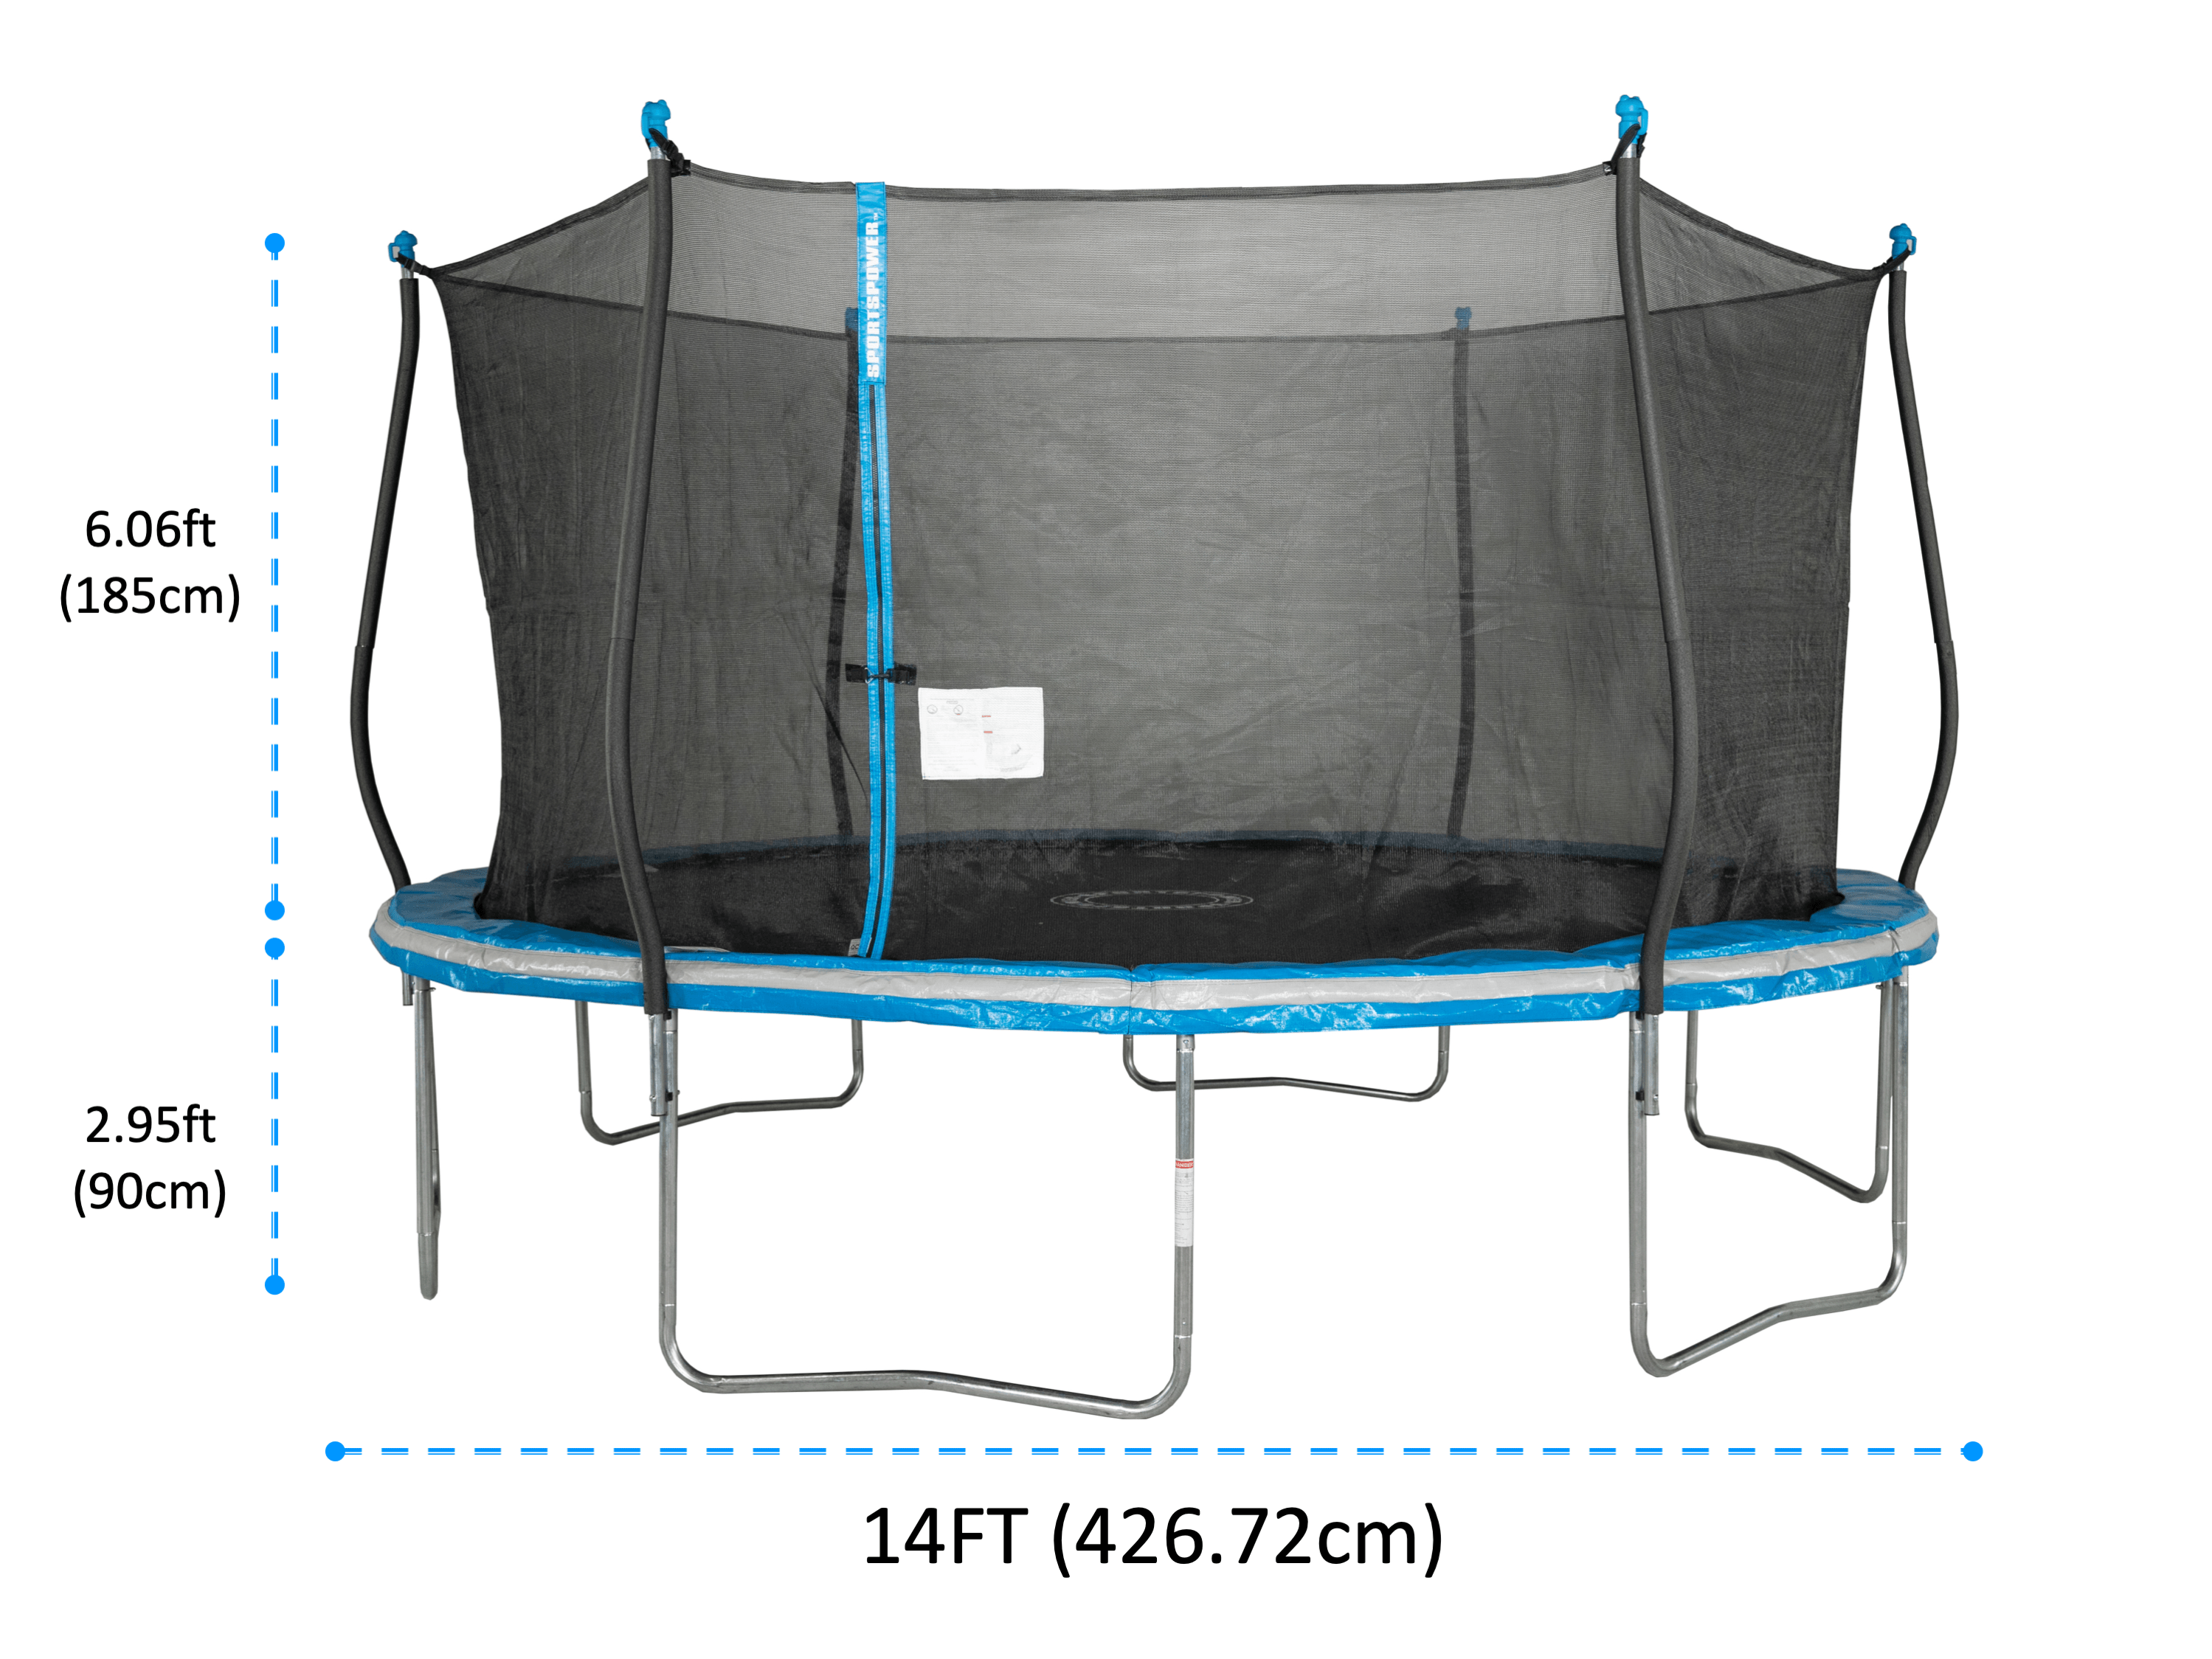 Bounce Pro 14' Trampoline, Classic Safety Enclosure, Blue - image 2 of 8